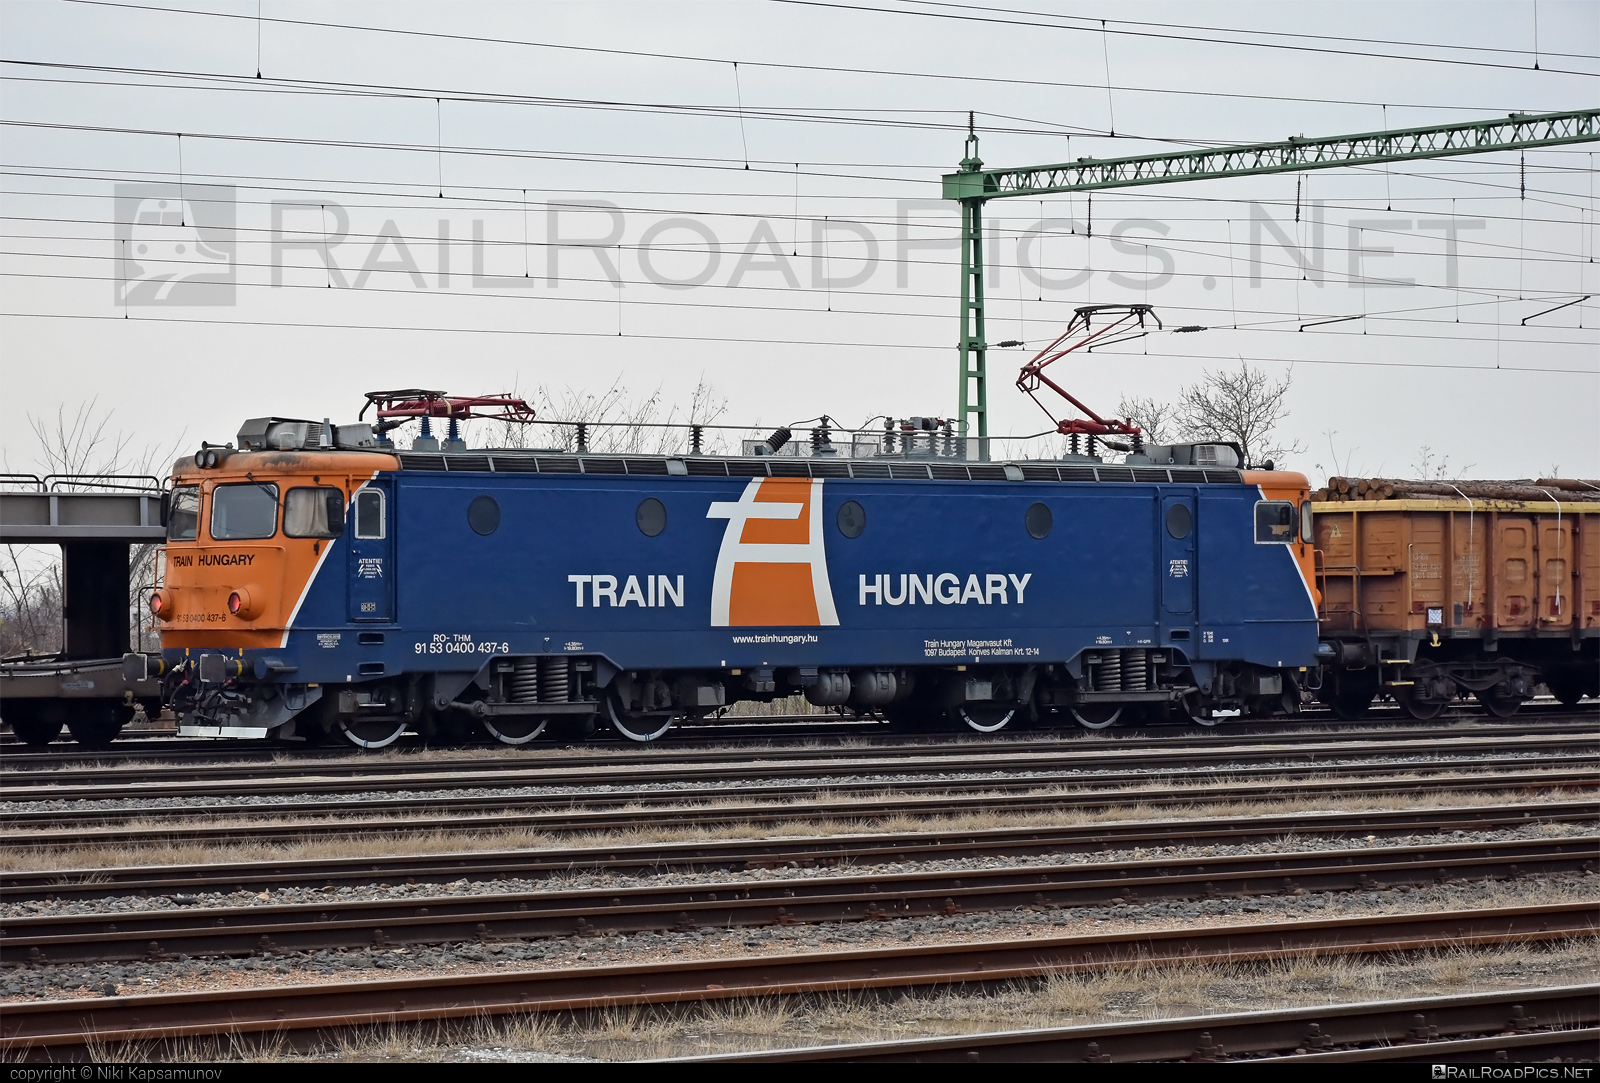 Electroputere LE 5100 - 0400 437-6 operated by Train Hungary Magánvasút Kft #electroputere #electroputerecraiova #electroputerele5100 #le5100 #trainhungary